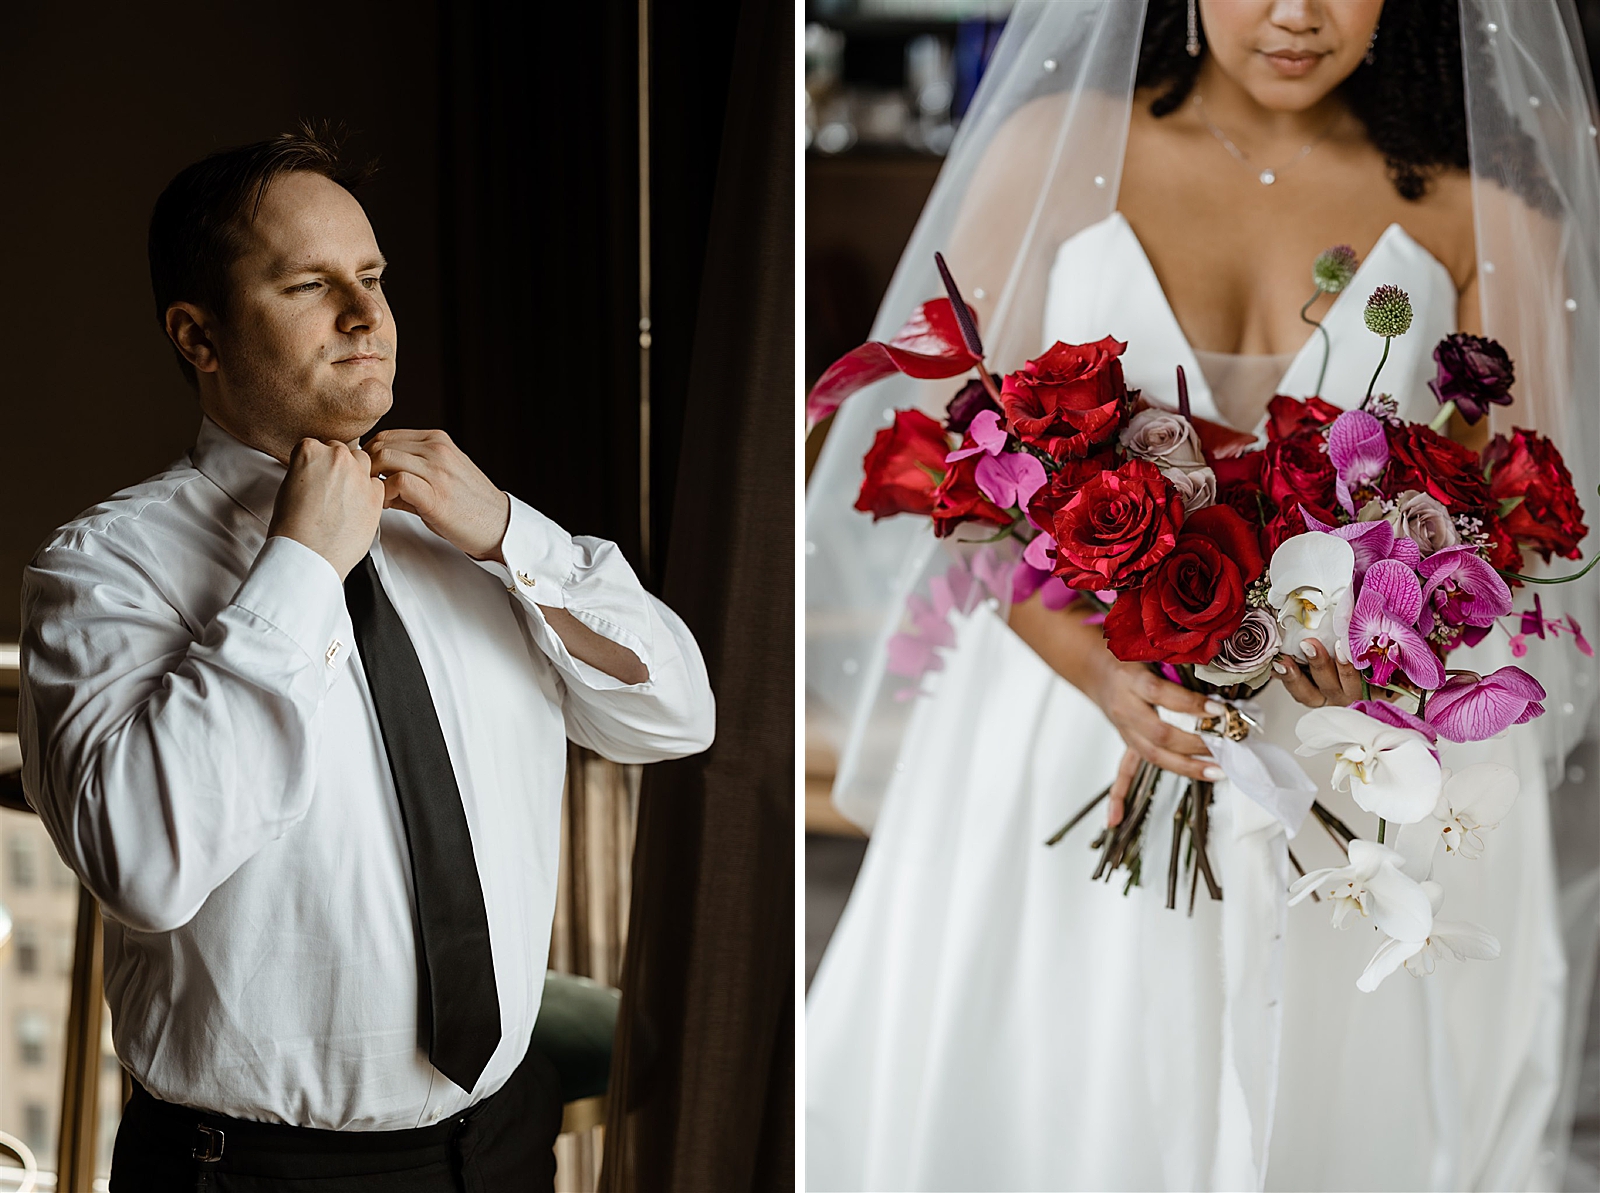 Left photo: Shot of the groom adjusting his tie.
Right photo: Shot of the bride in her wedding gown while holding her bouquet. 